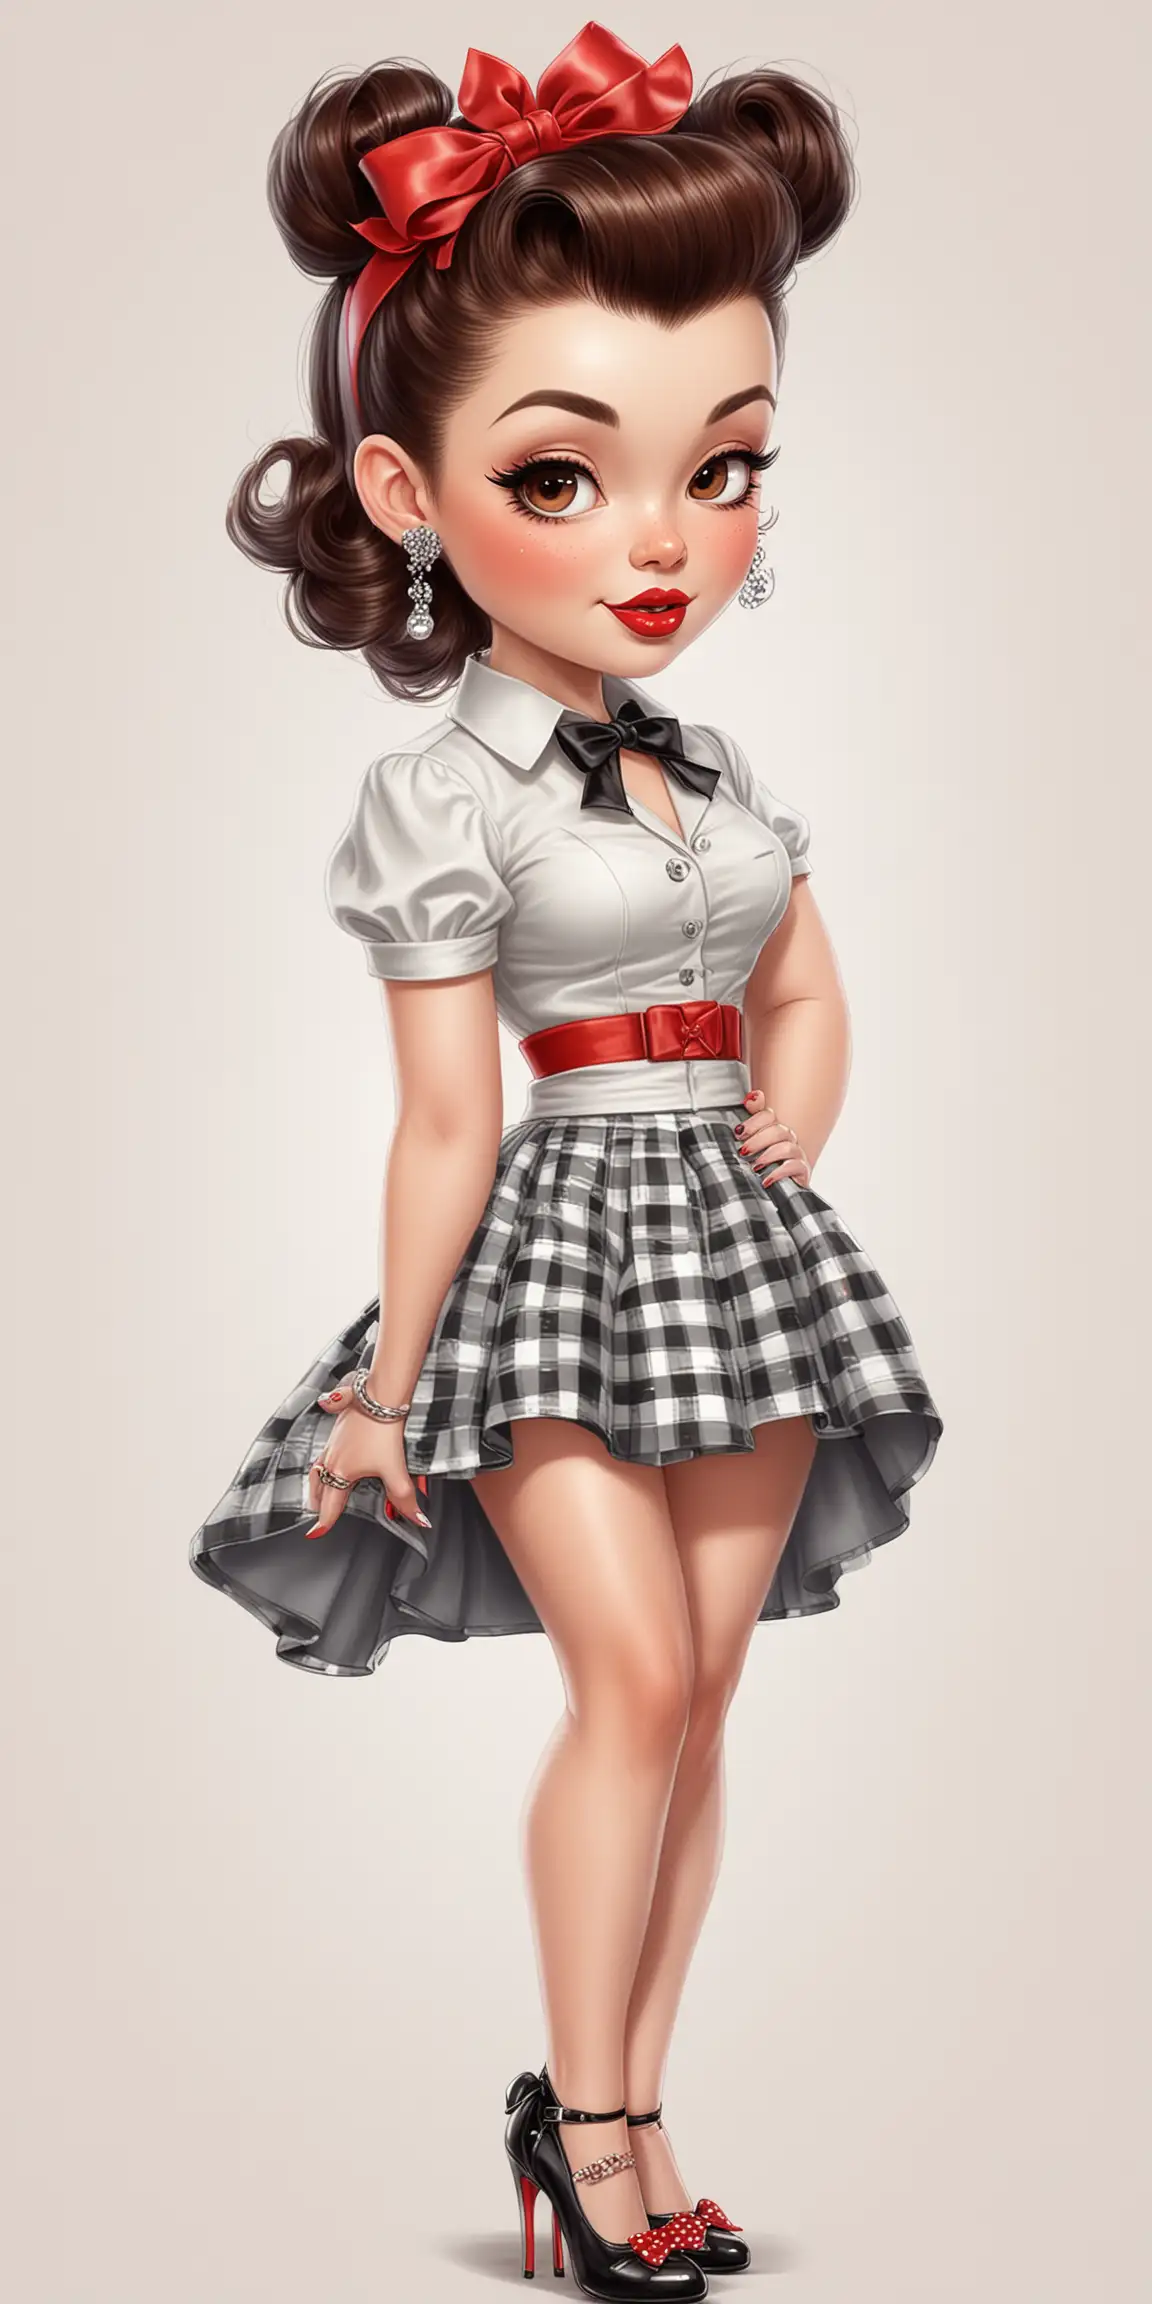 ChibiStyle 1950s Rockabilly Fashionista with Victory Rolls and Accessories